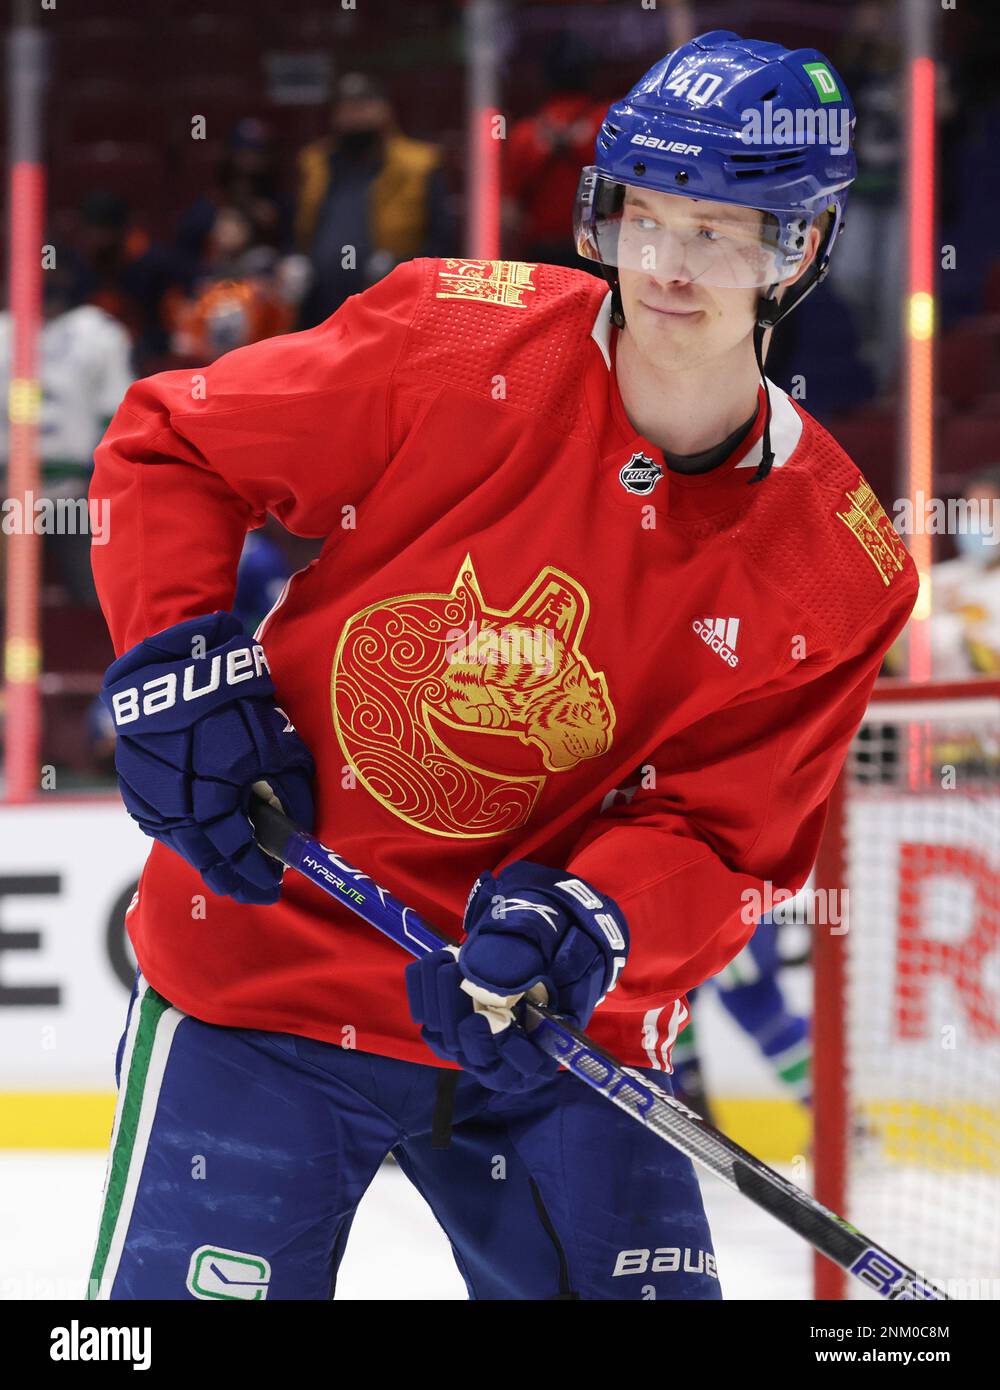 Canucks to wear special red jerseys for Chinese New Year (PHOTOS